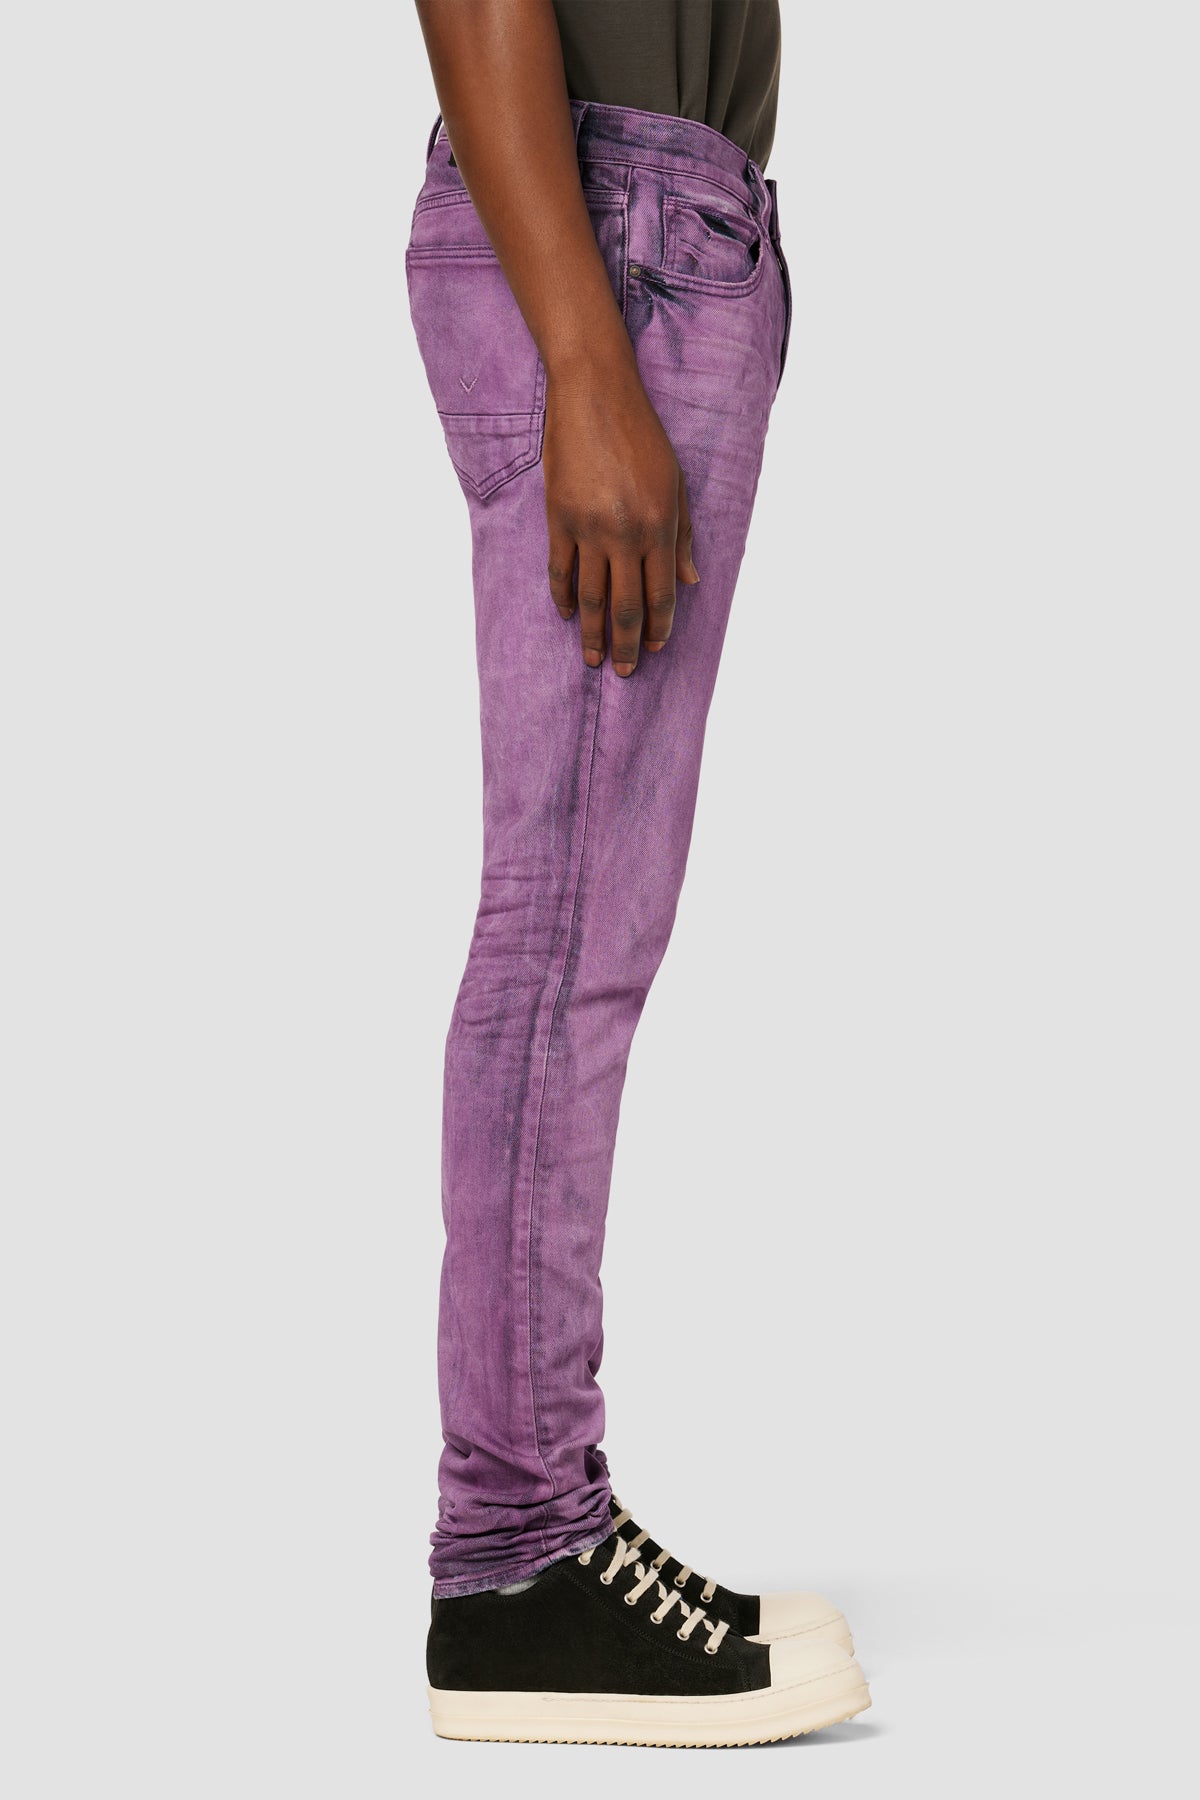 Purple Jeans Size 30 31 For Two Best Deal - Jeans